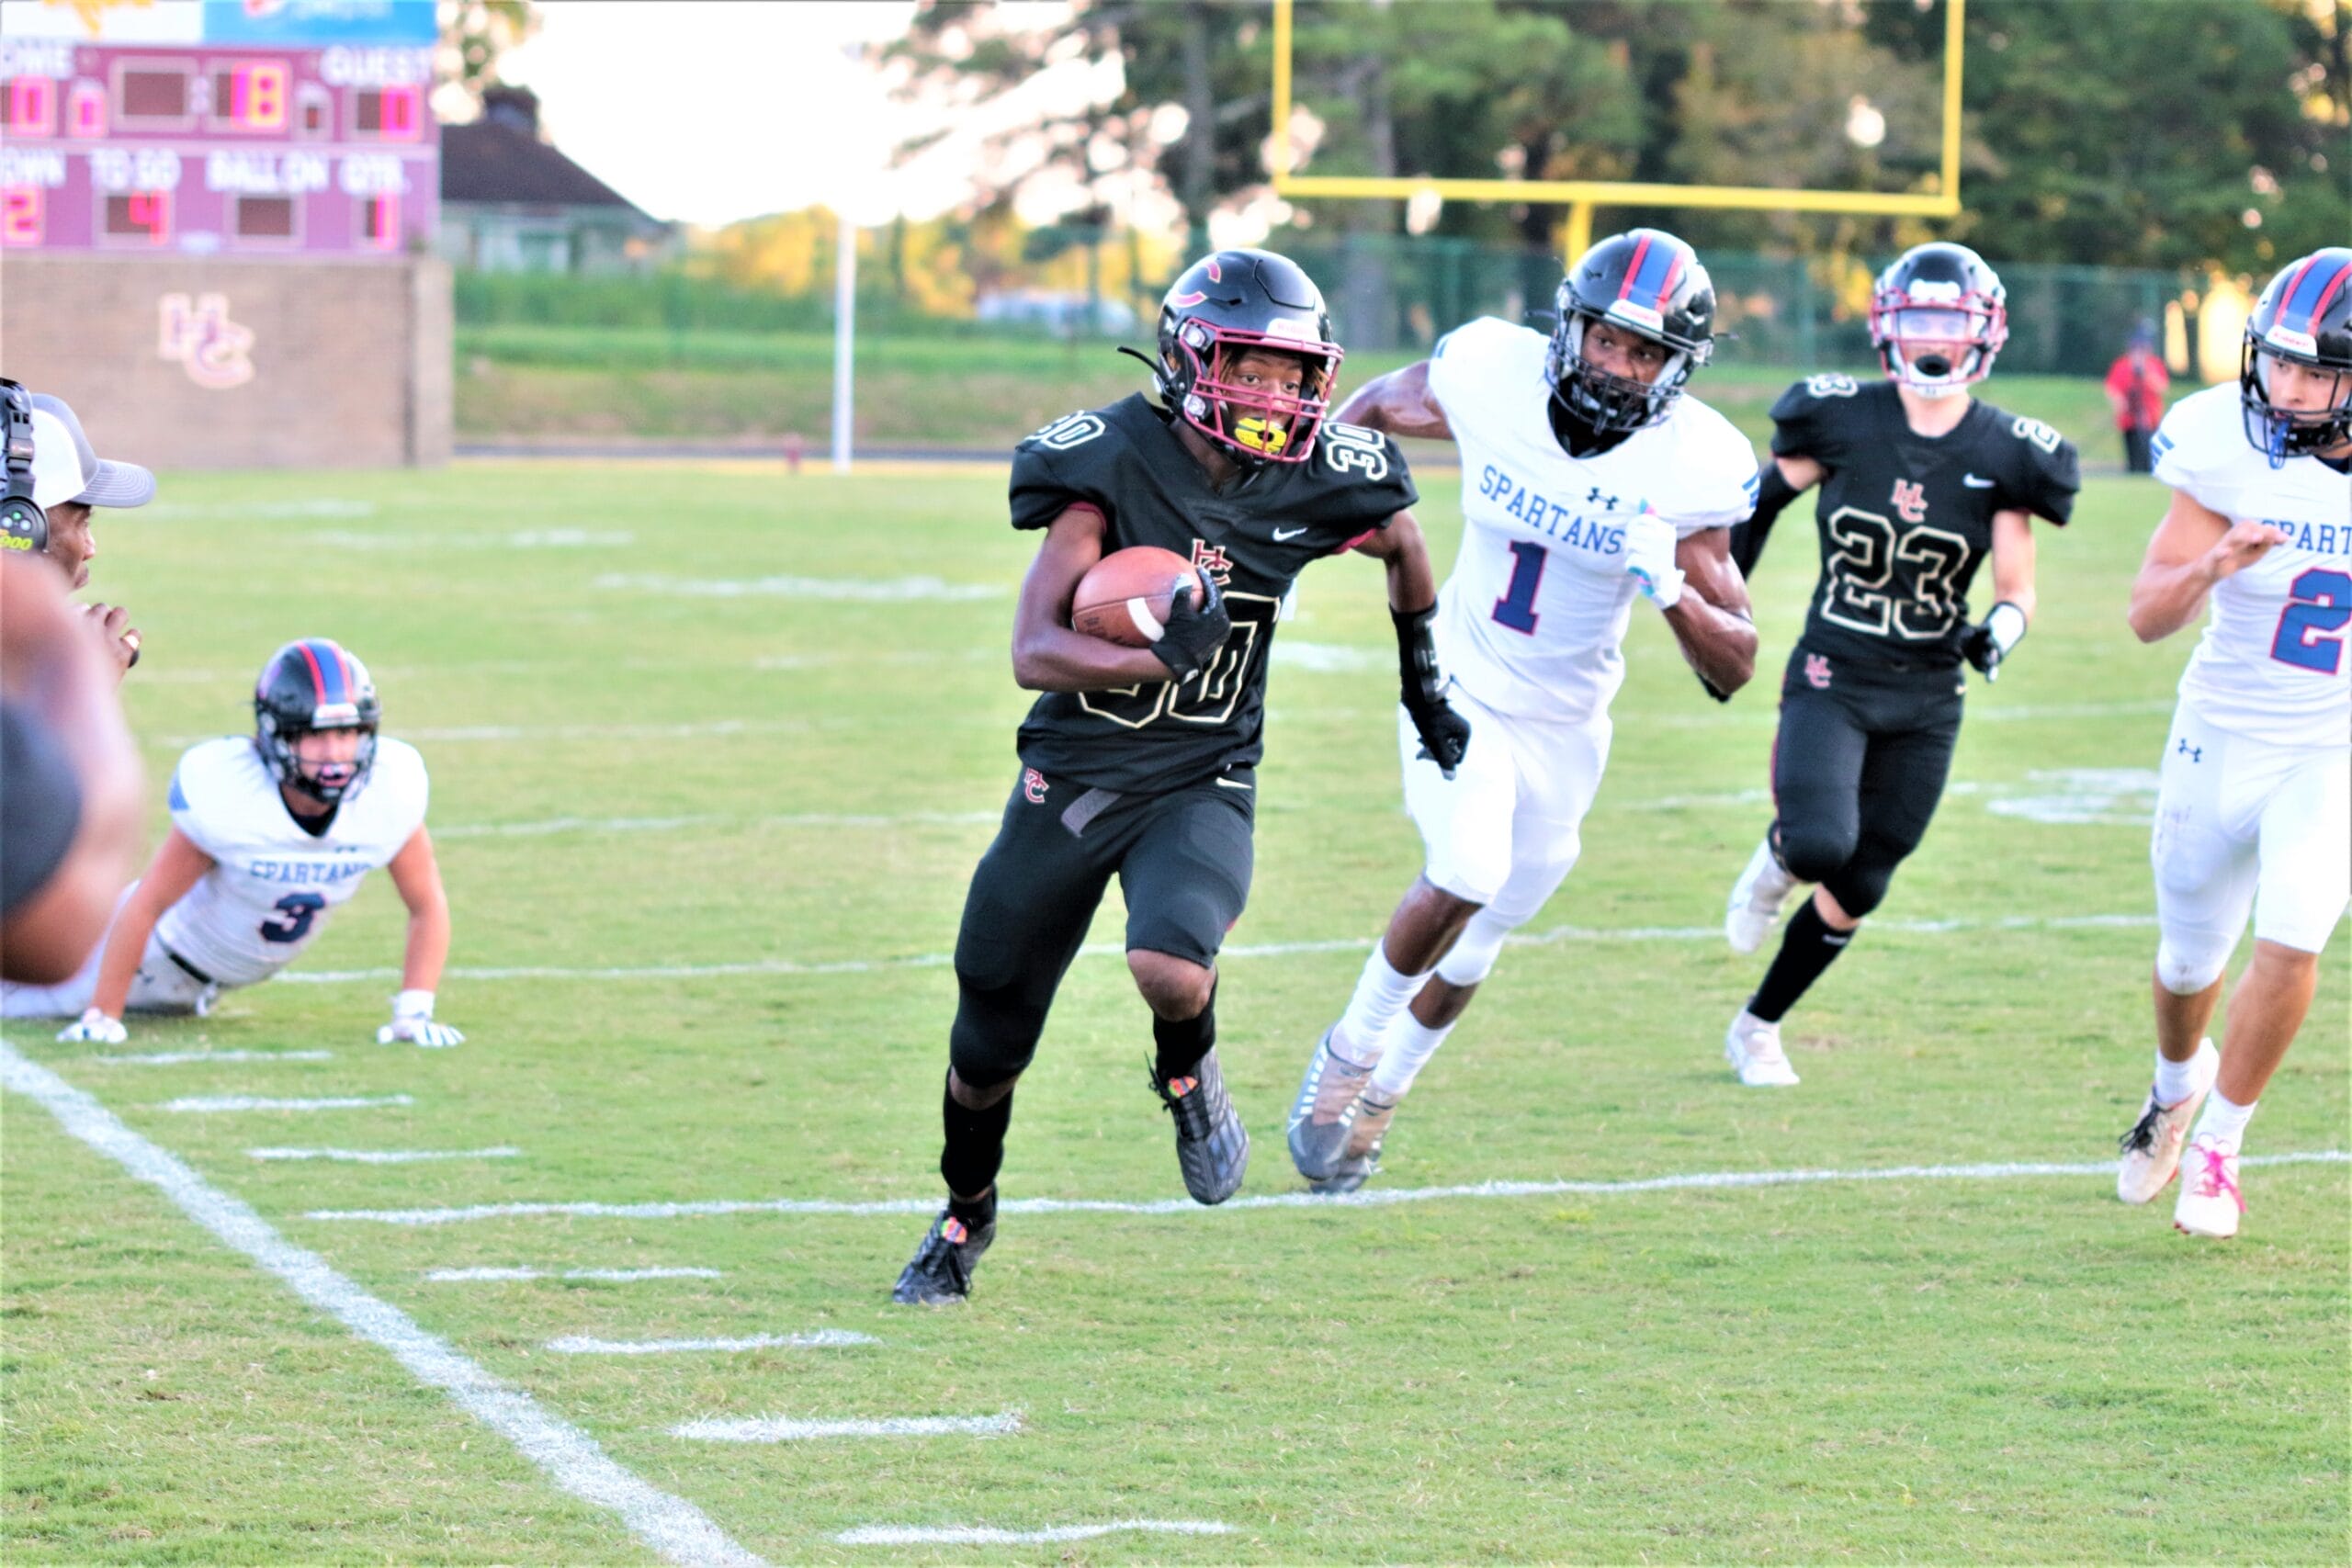 HC drops home opener to Sanderson